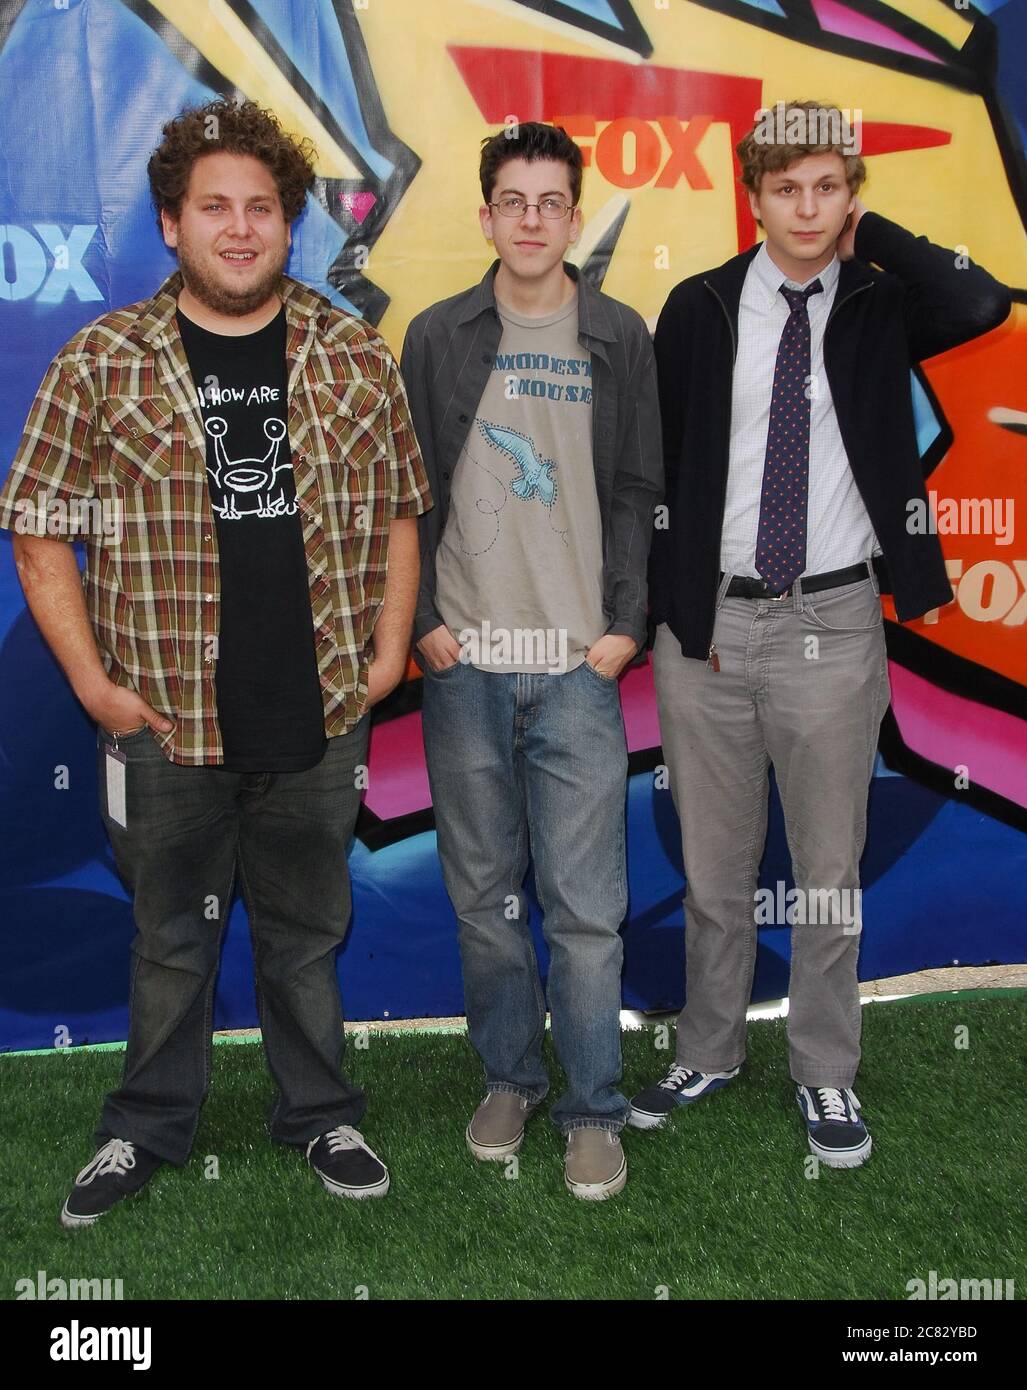 Superbad' Reunion: Jonah Hill, Michael Cera to Voice Adult Swim's 'The  Shivering Truth